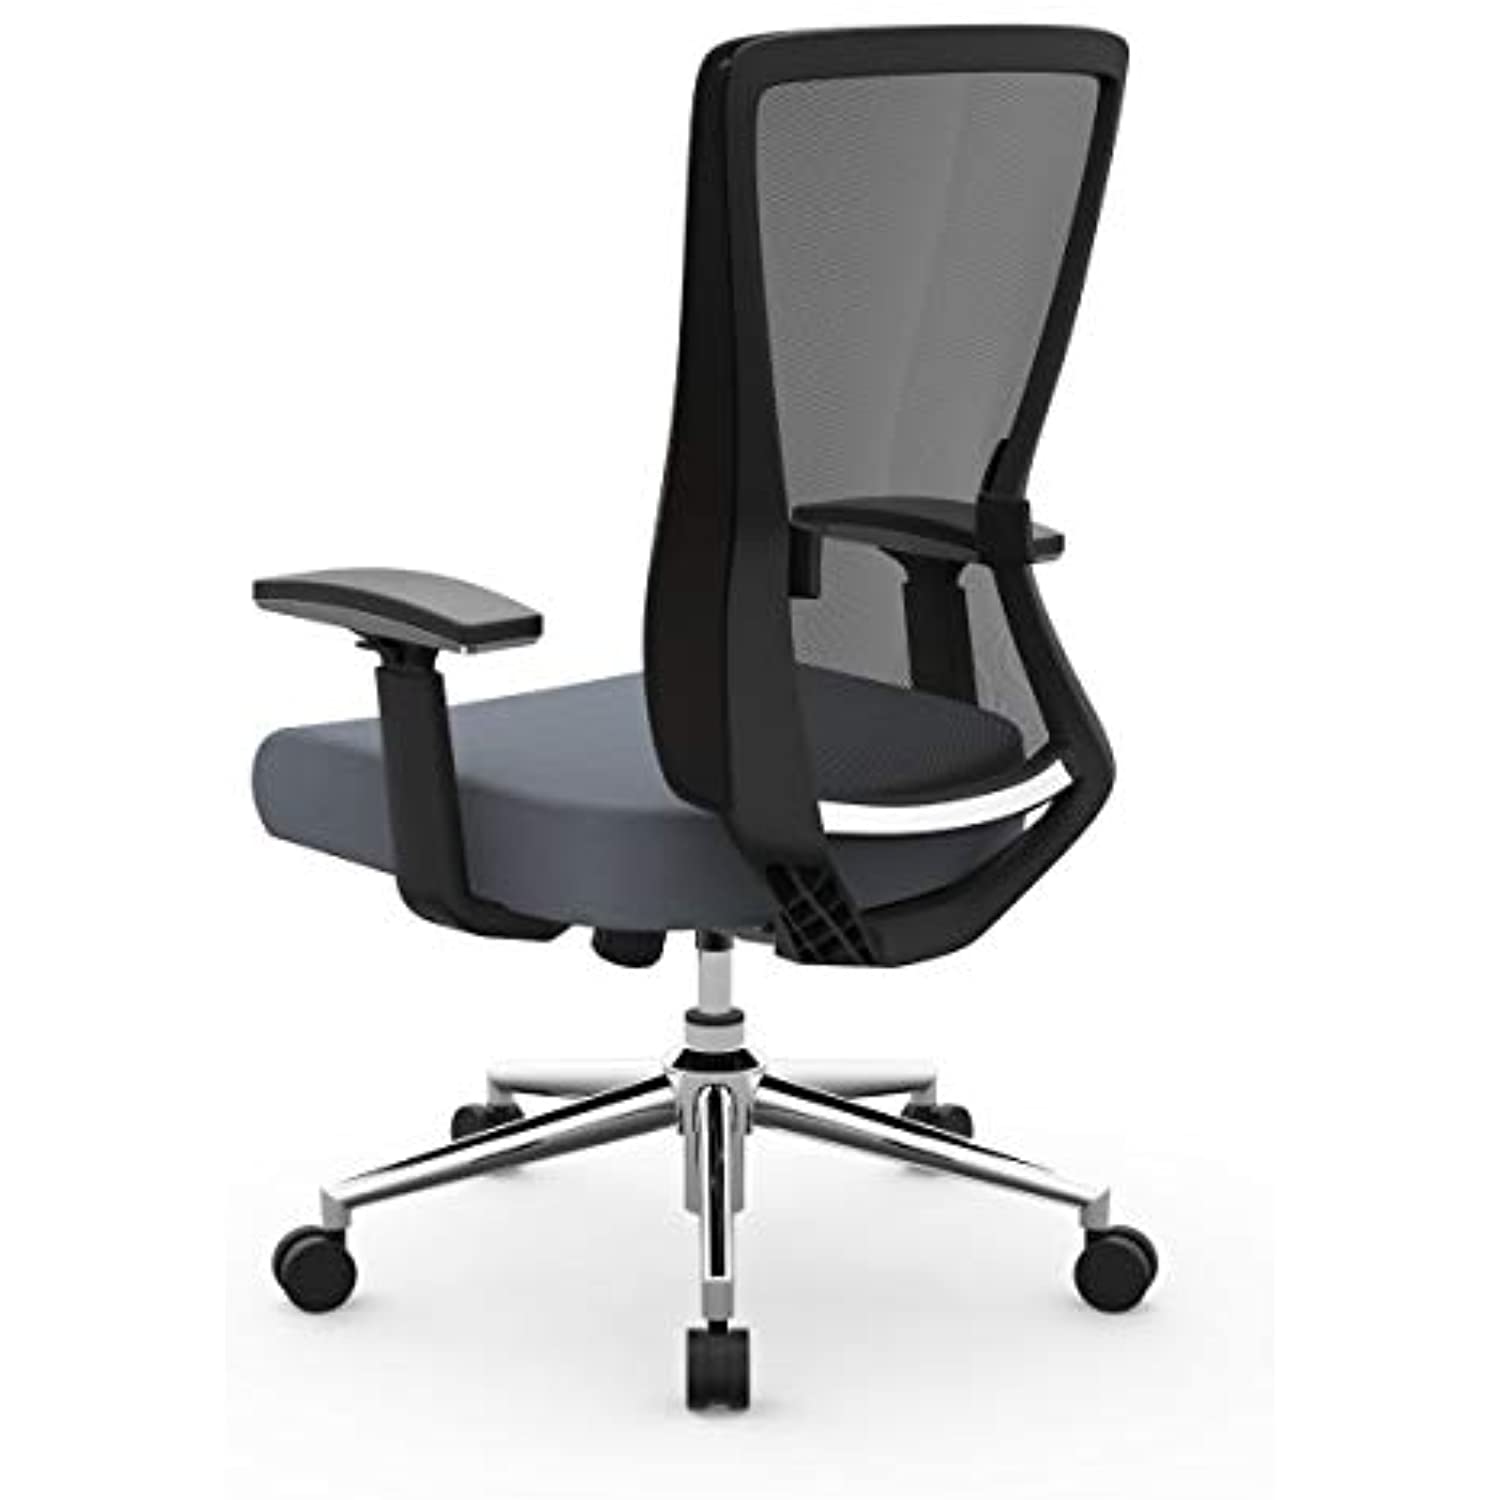 Realspace Levari Faux Leather Mid-Back Task Chair, Gray/Black - image 4 of 8